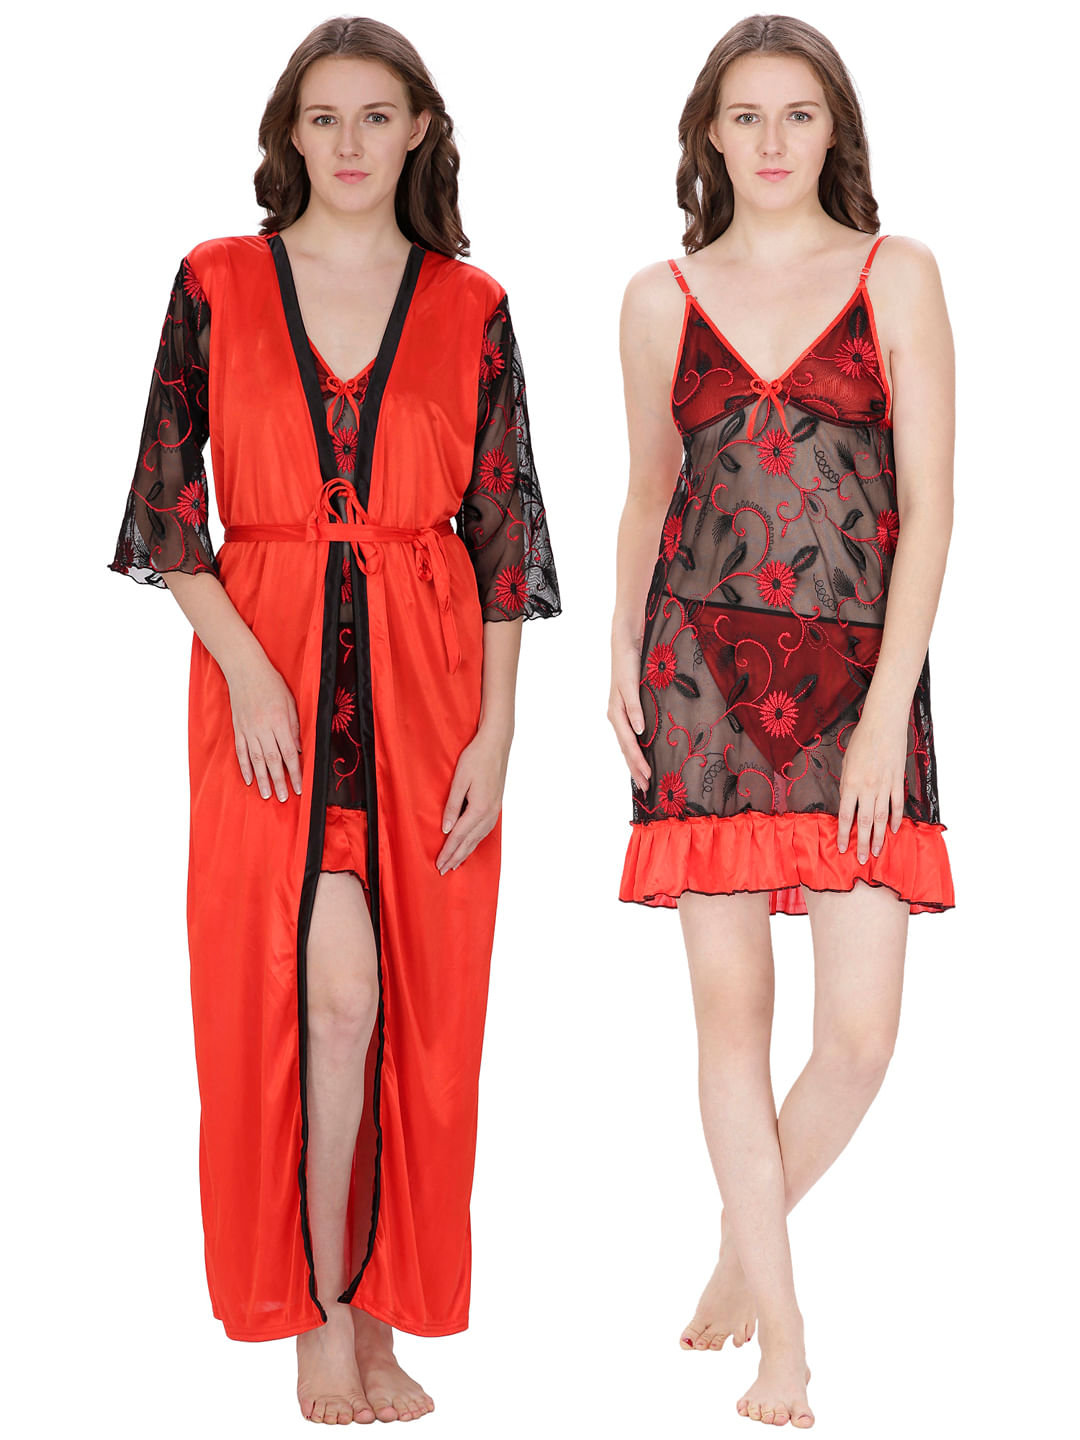 Net, Satin Red Robe (Red, Free Size)